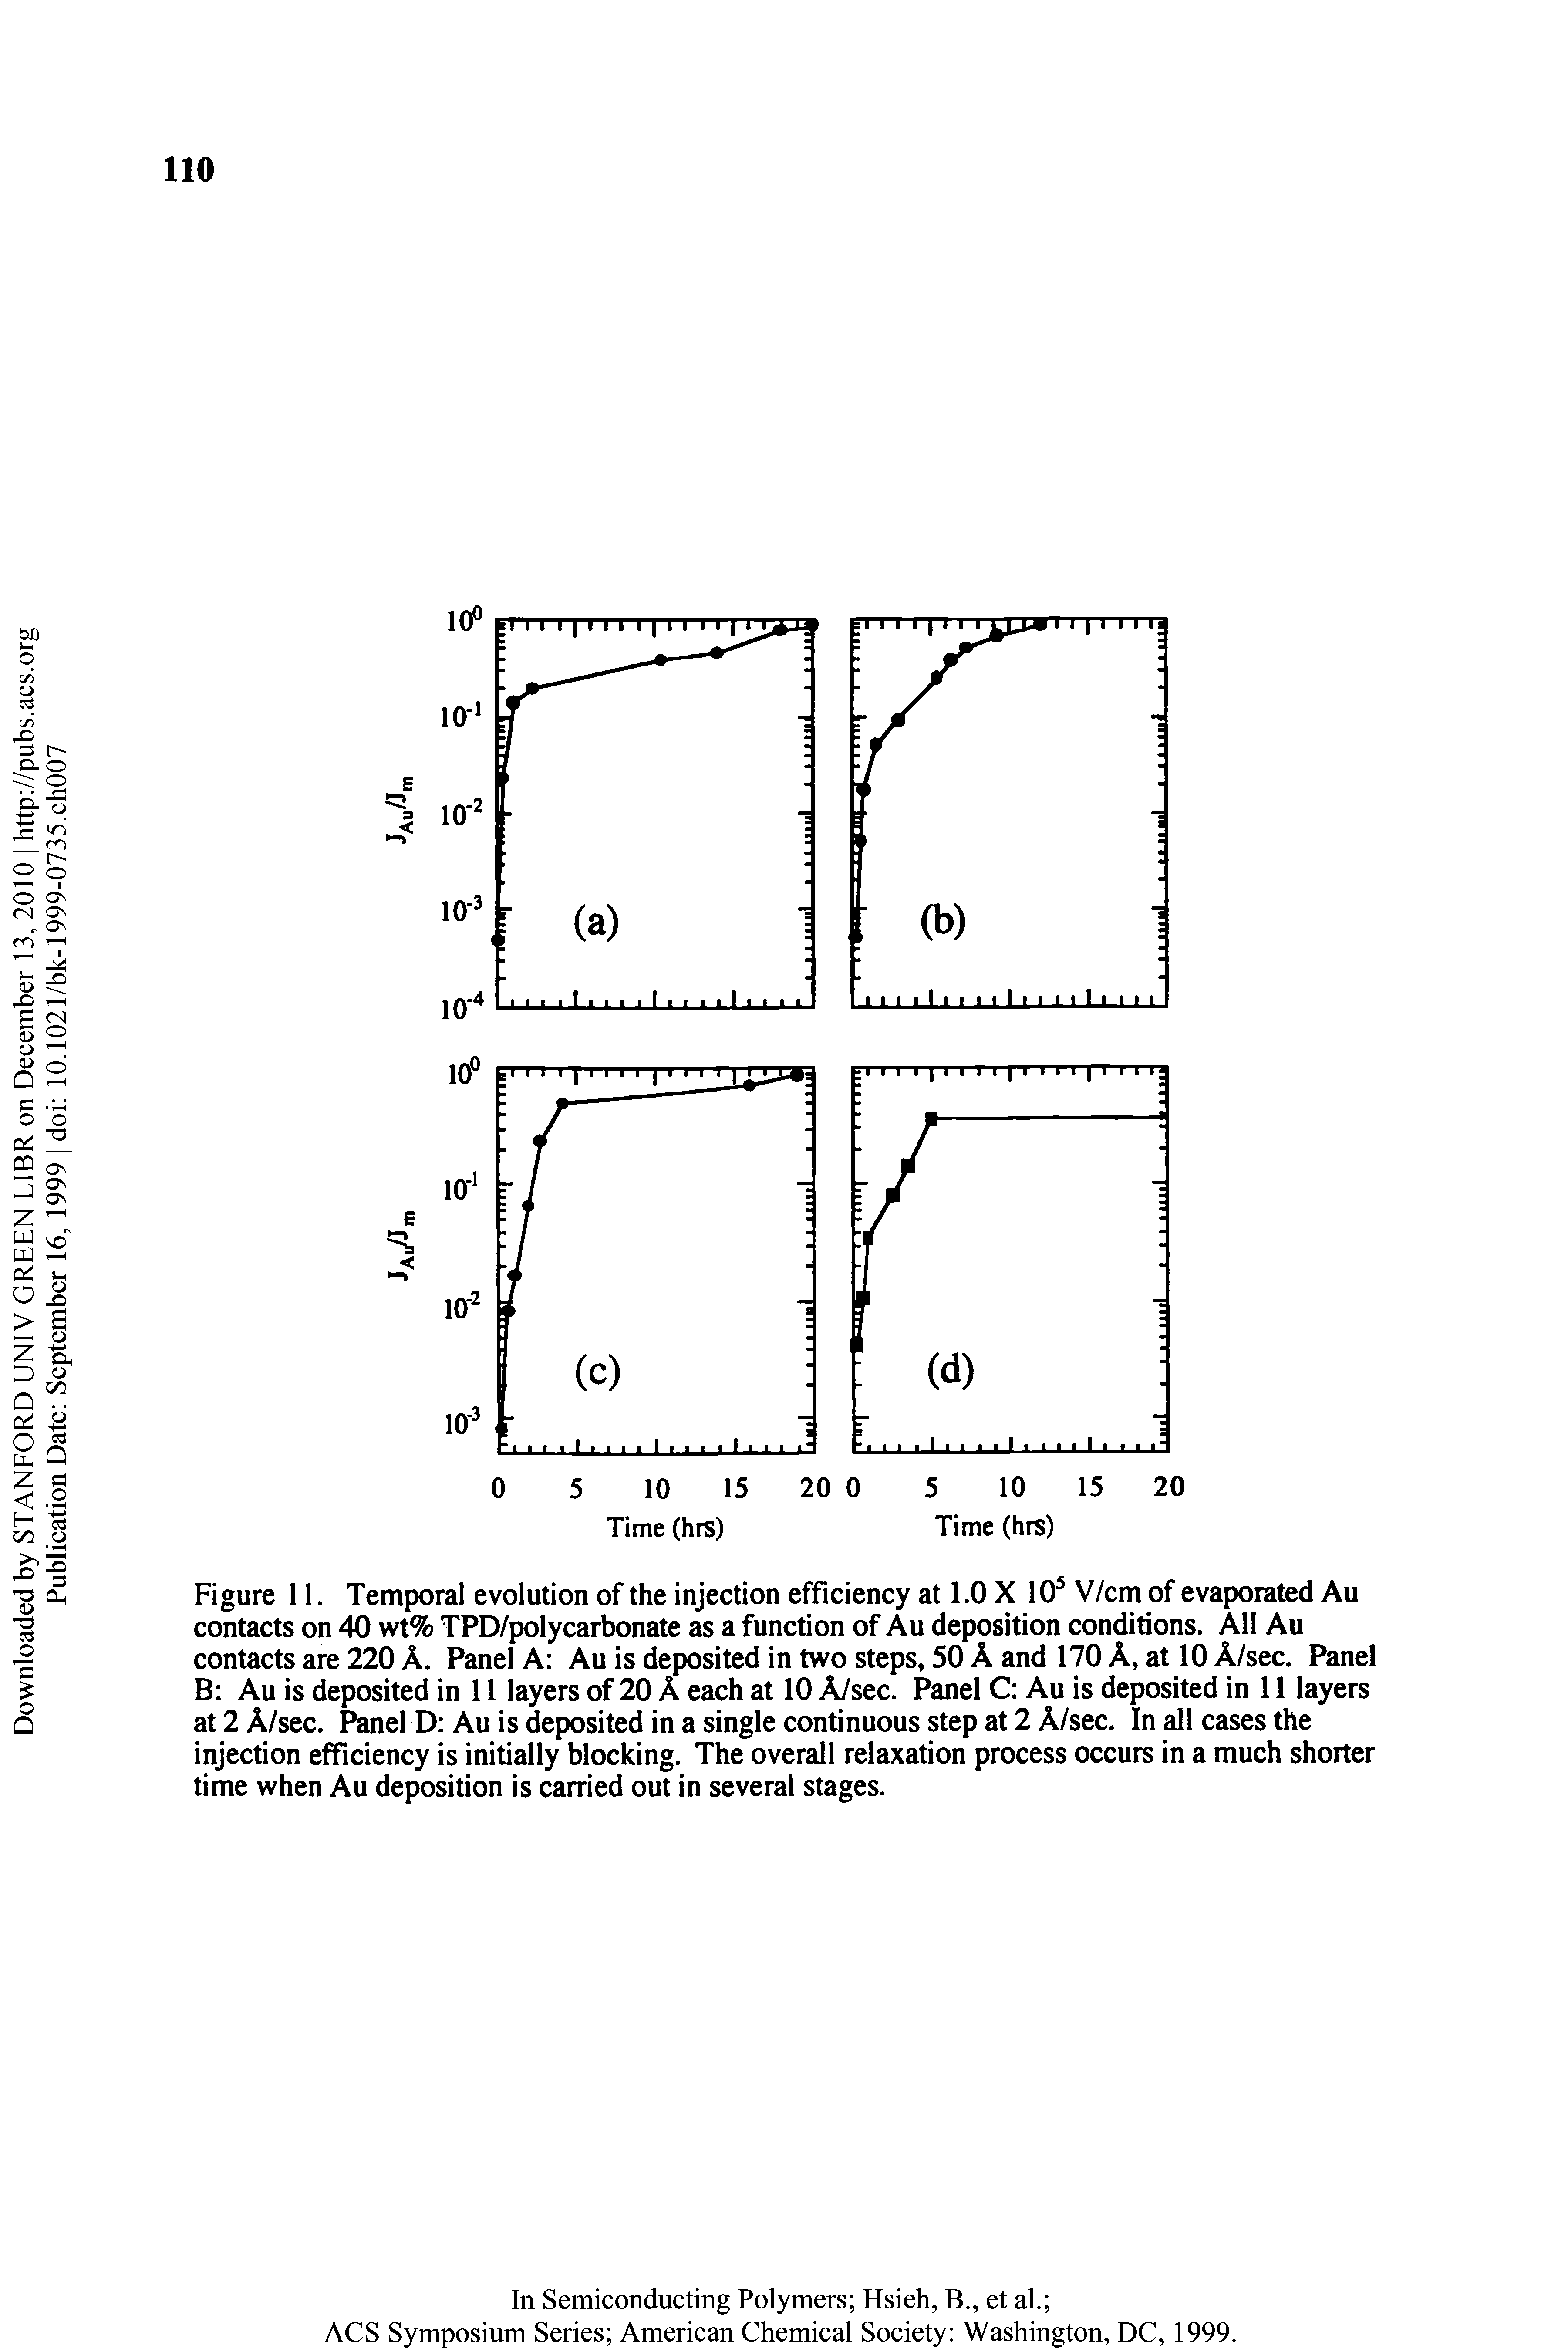 Figure 11. Temporal evolution of the injection efficiency at 1.0 X 10 V/cm of evaporated Au contacts on 40 wt% TPD/polycarbonate as a function of Au deposition conditions. All Au contacts are 220 A. Panel A Au is deposited in two steps, 50 A and 170 A, at 10 A/sec. Panel B Au is deposited in 11 layers of 20 A each at 10 A/sec. Panel C Au is deposited in 11 layers at 2 A/sec. Panel D Au is deposited in a single continuous step at 2 A/sec. In all cases the injection efficiency is initially blocking. The overall relaxation process occurs in a much shorter time when Au deposition is carried out in several stages.